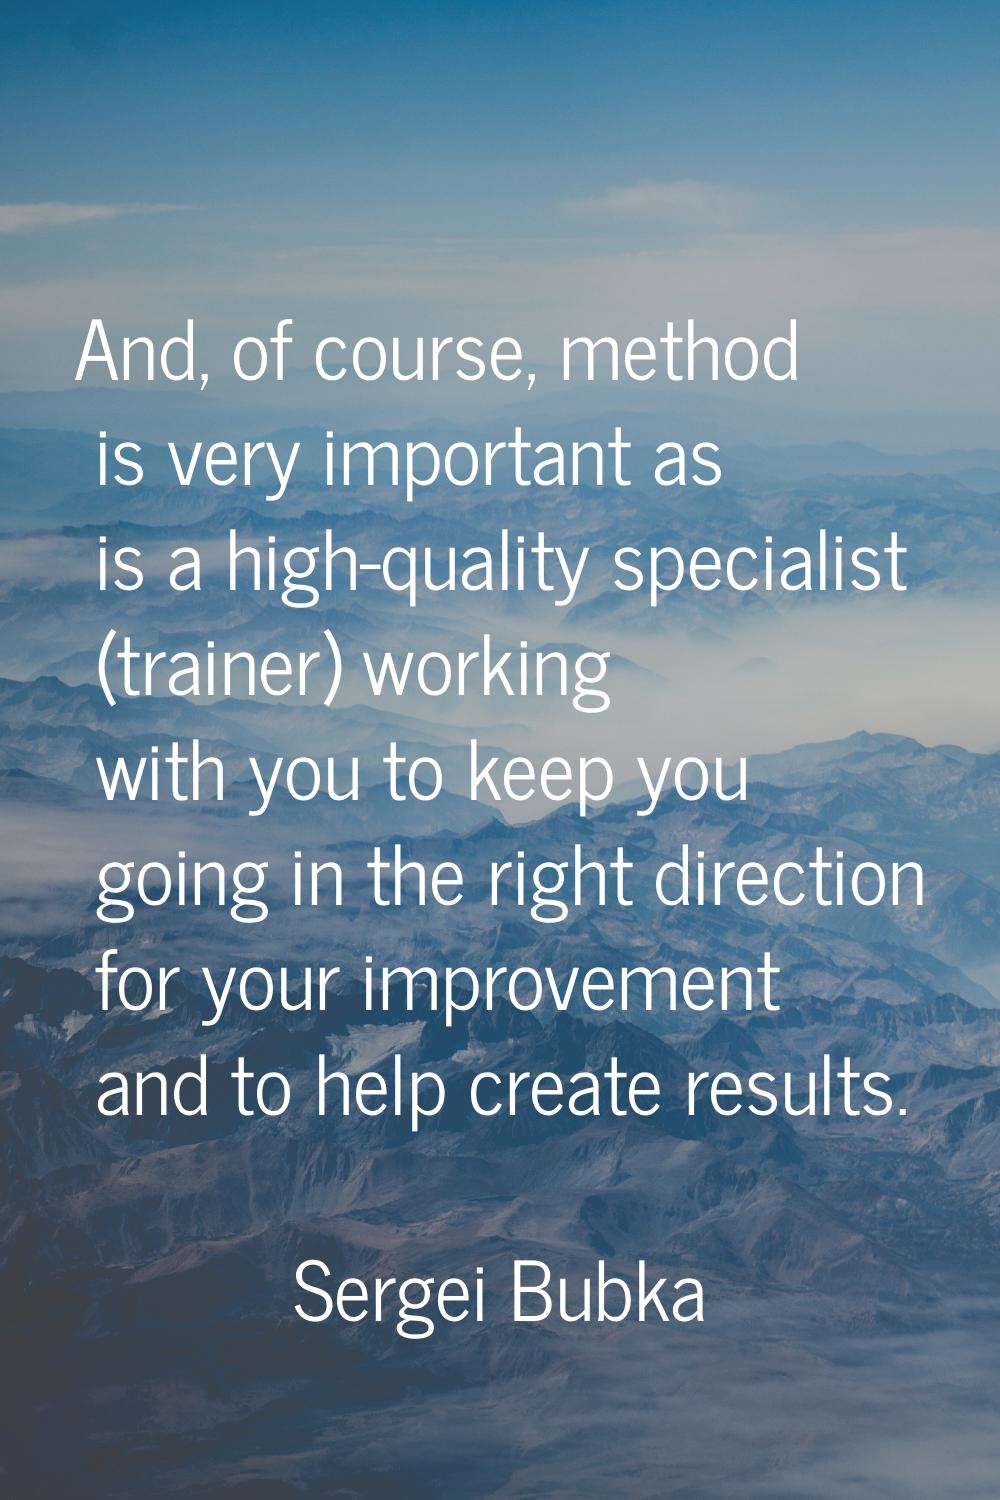 And, of course, method is very important as is a high-quality specialist (trainer) working with you